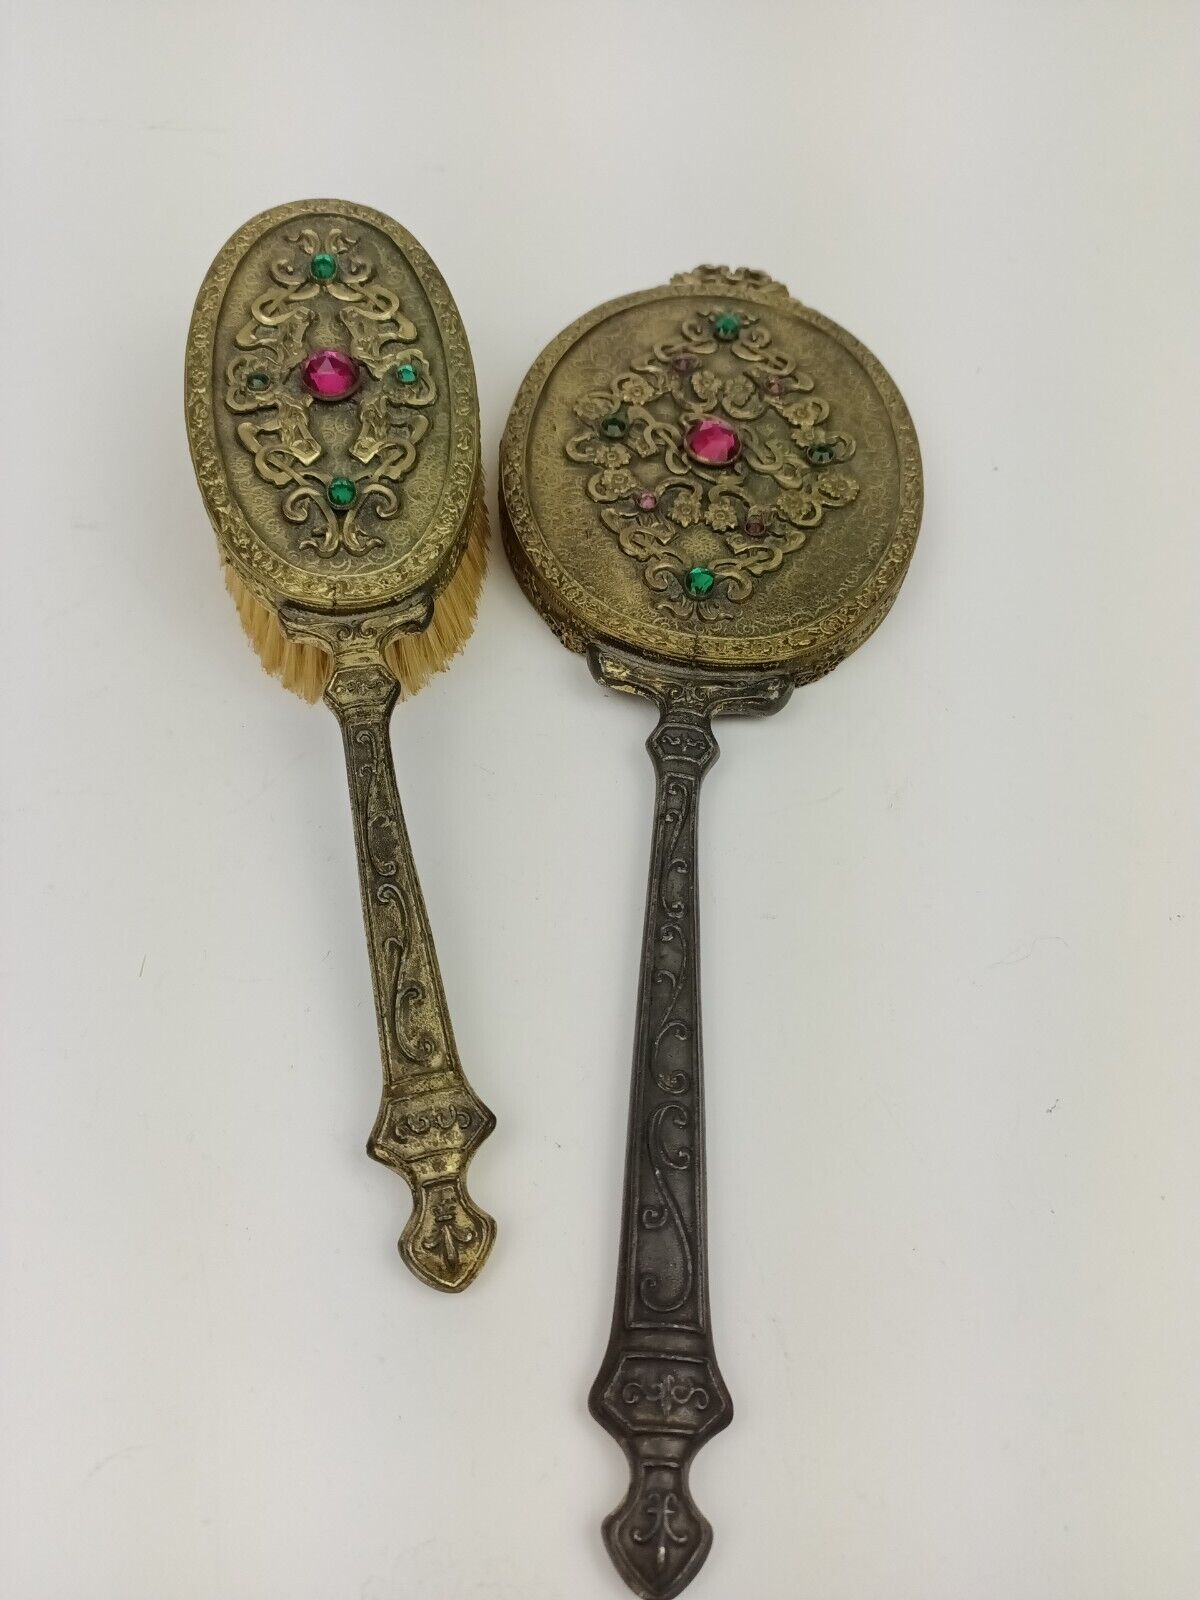 Antique Hand Mirror Brush Vanity Set With Green And Red Jewel Accents 